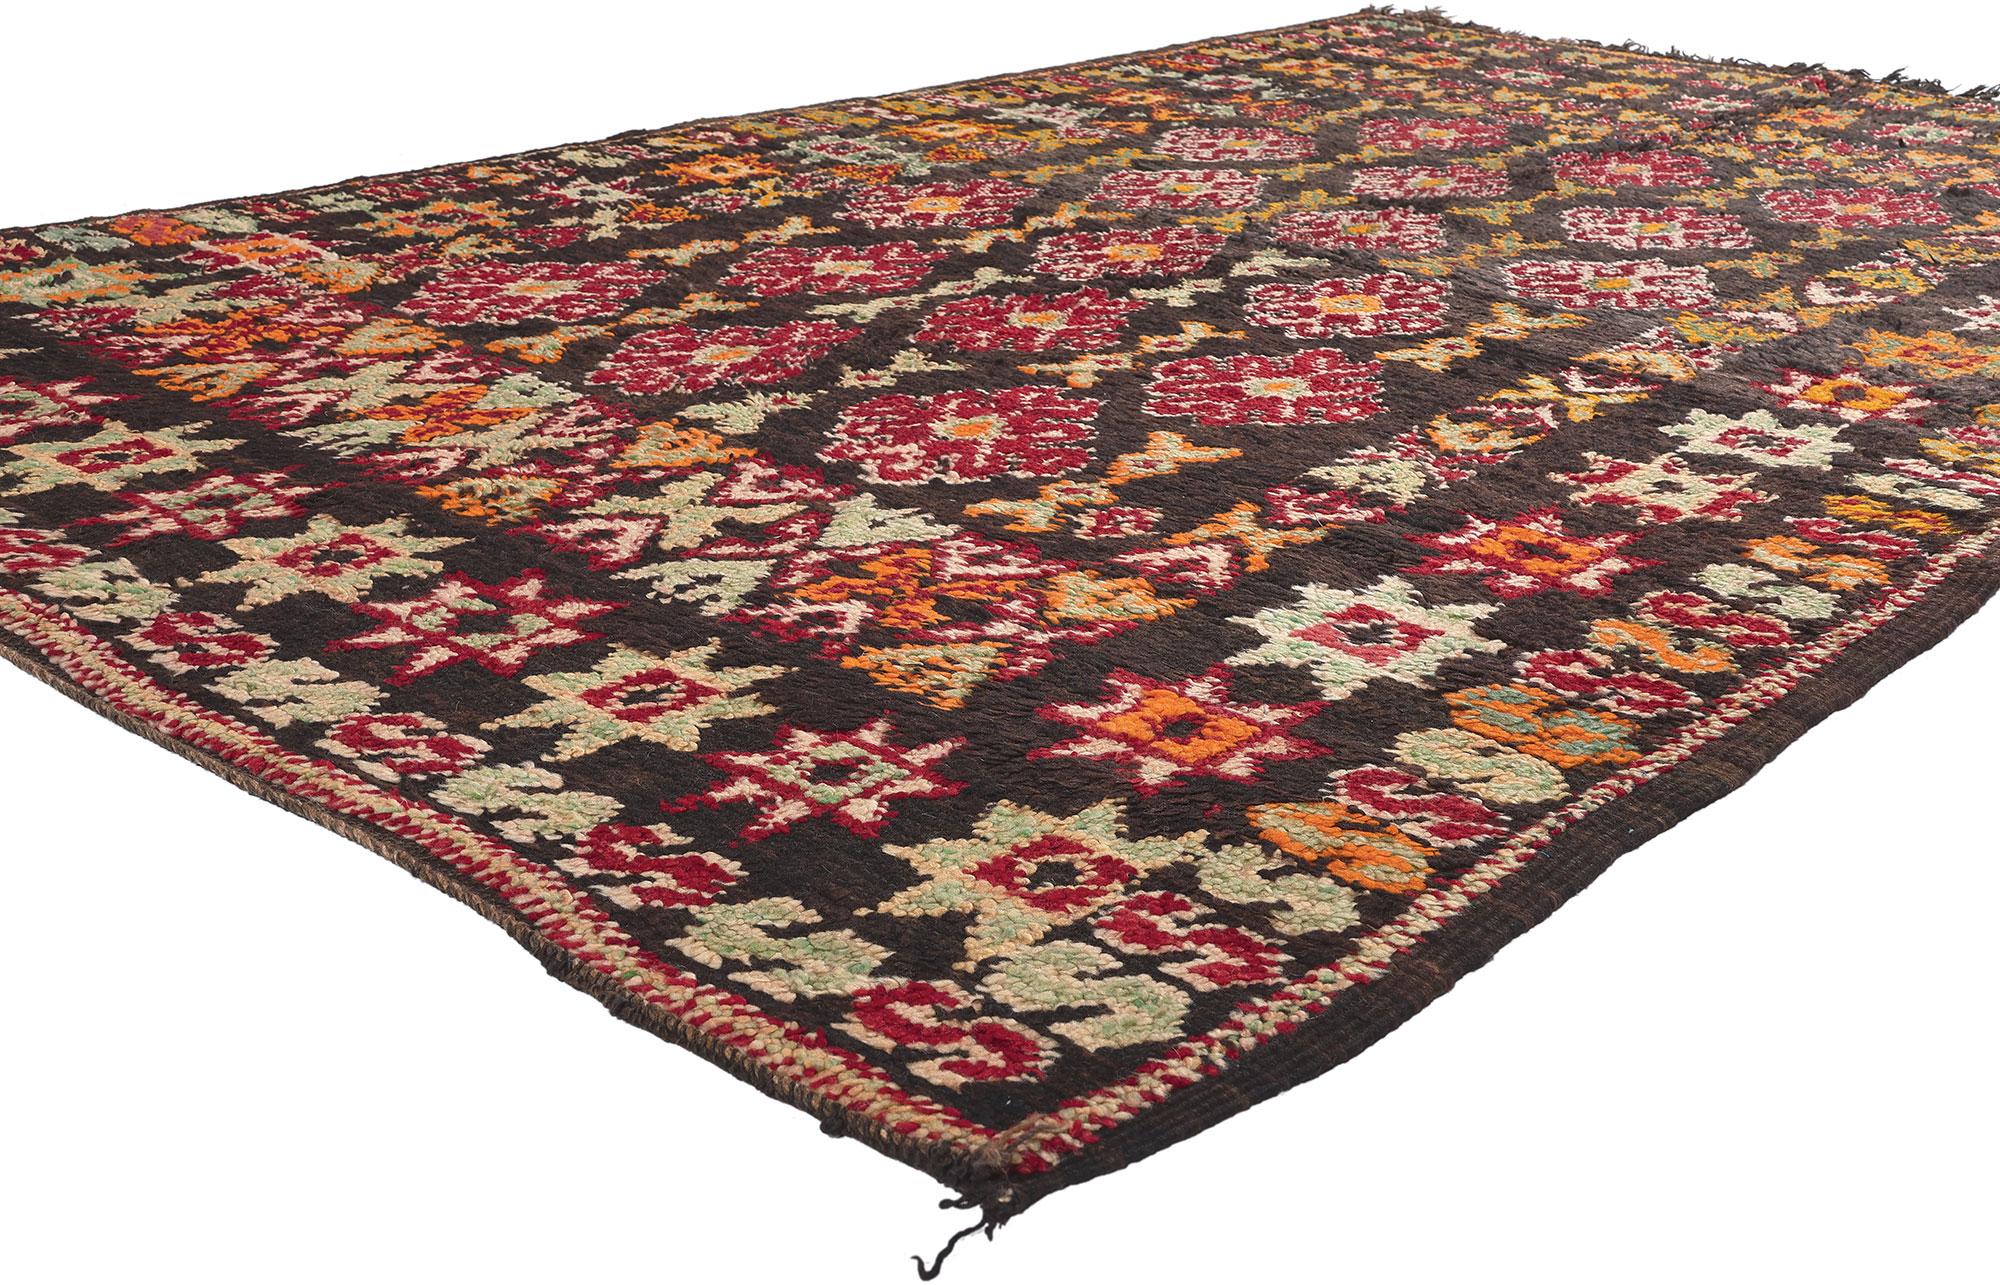 20722 Vintage Beni MGuild Moroccan Rug, 06'00 x 09'00. In the enchanting convergence of Midcentury Modern and nomadic allure, discover the allure of this hand-knotted wool vintage Beni Mguild Moroccan rug—a treasure from the western central Middle